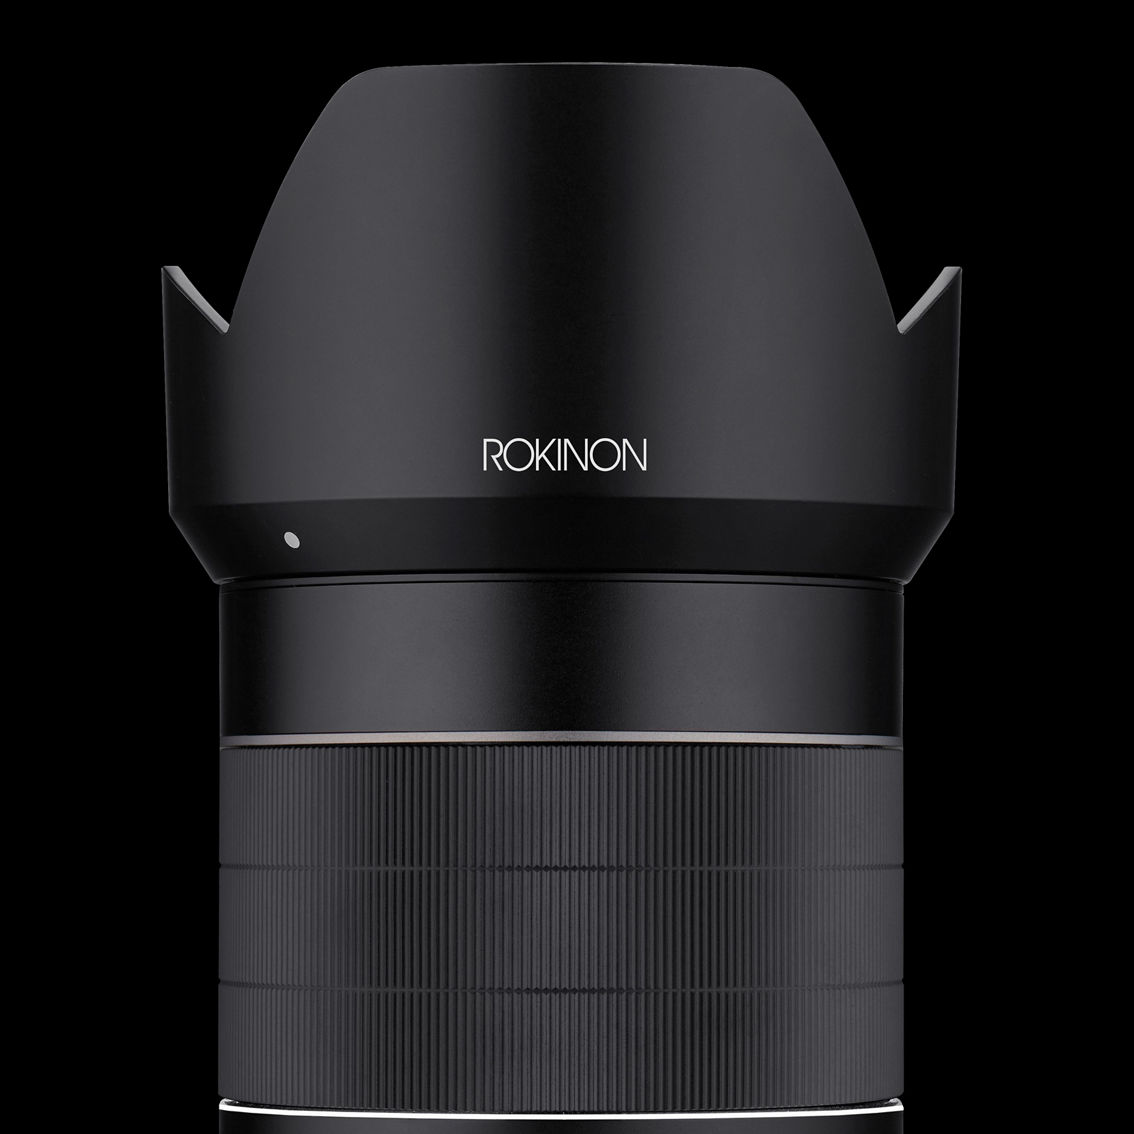 Rokinon 35mm F1.4 AF Series II Full Frame Wide Angle Lens for Sony E - Image 1 of 5